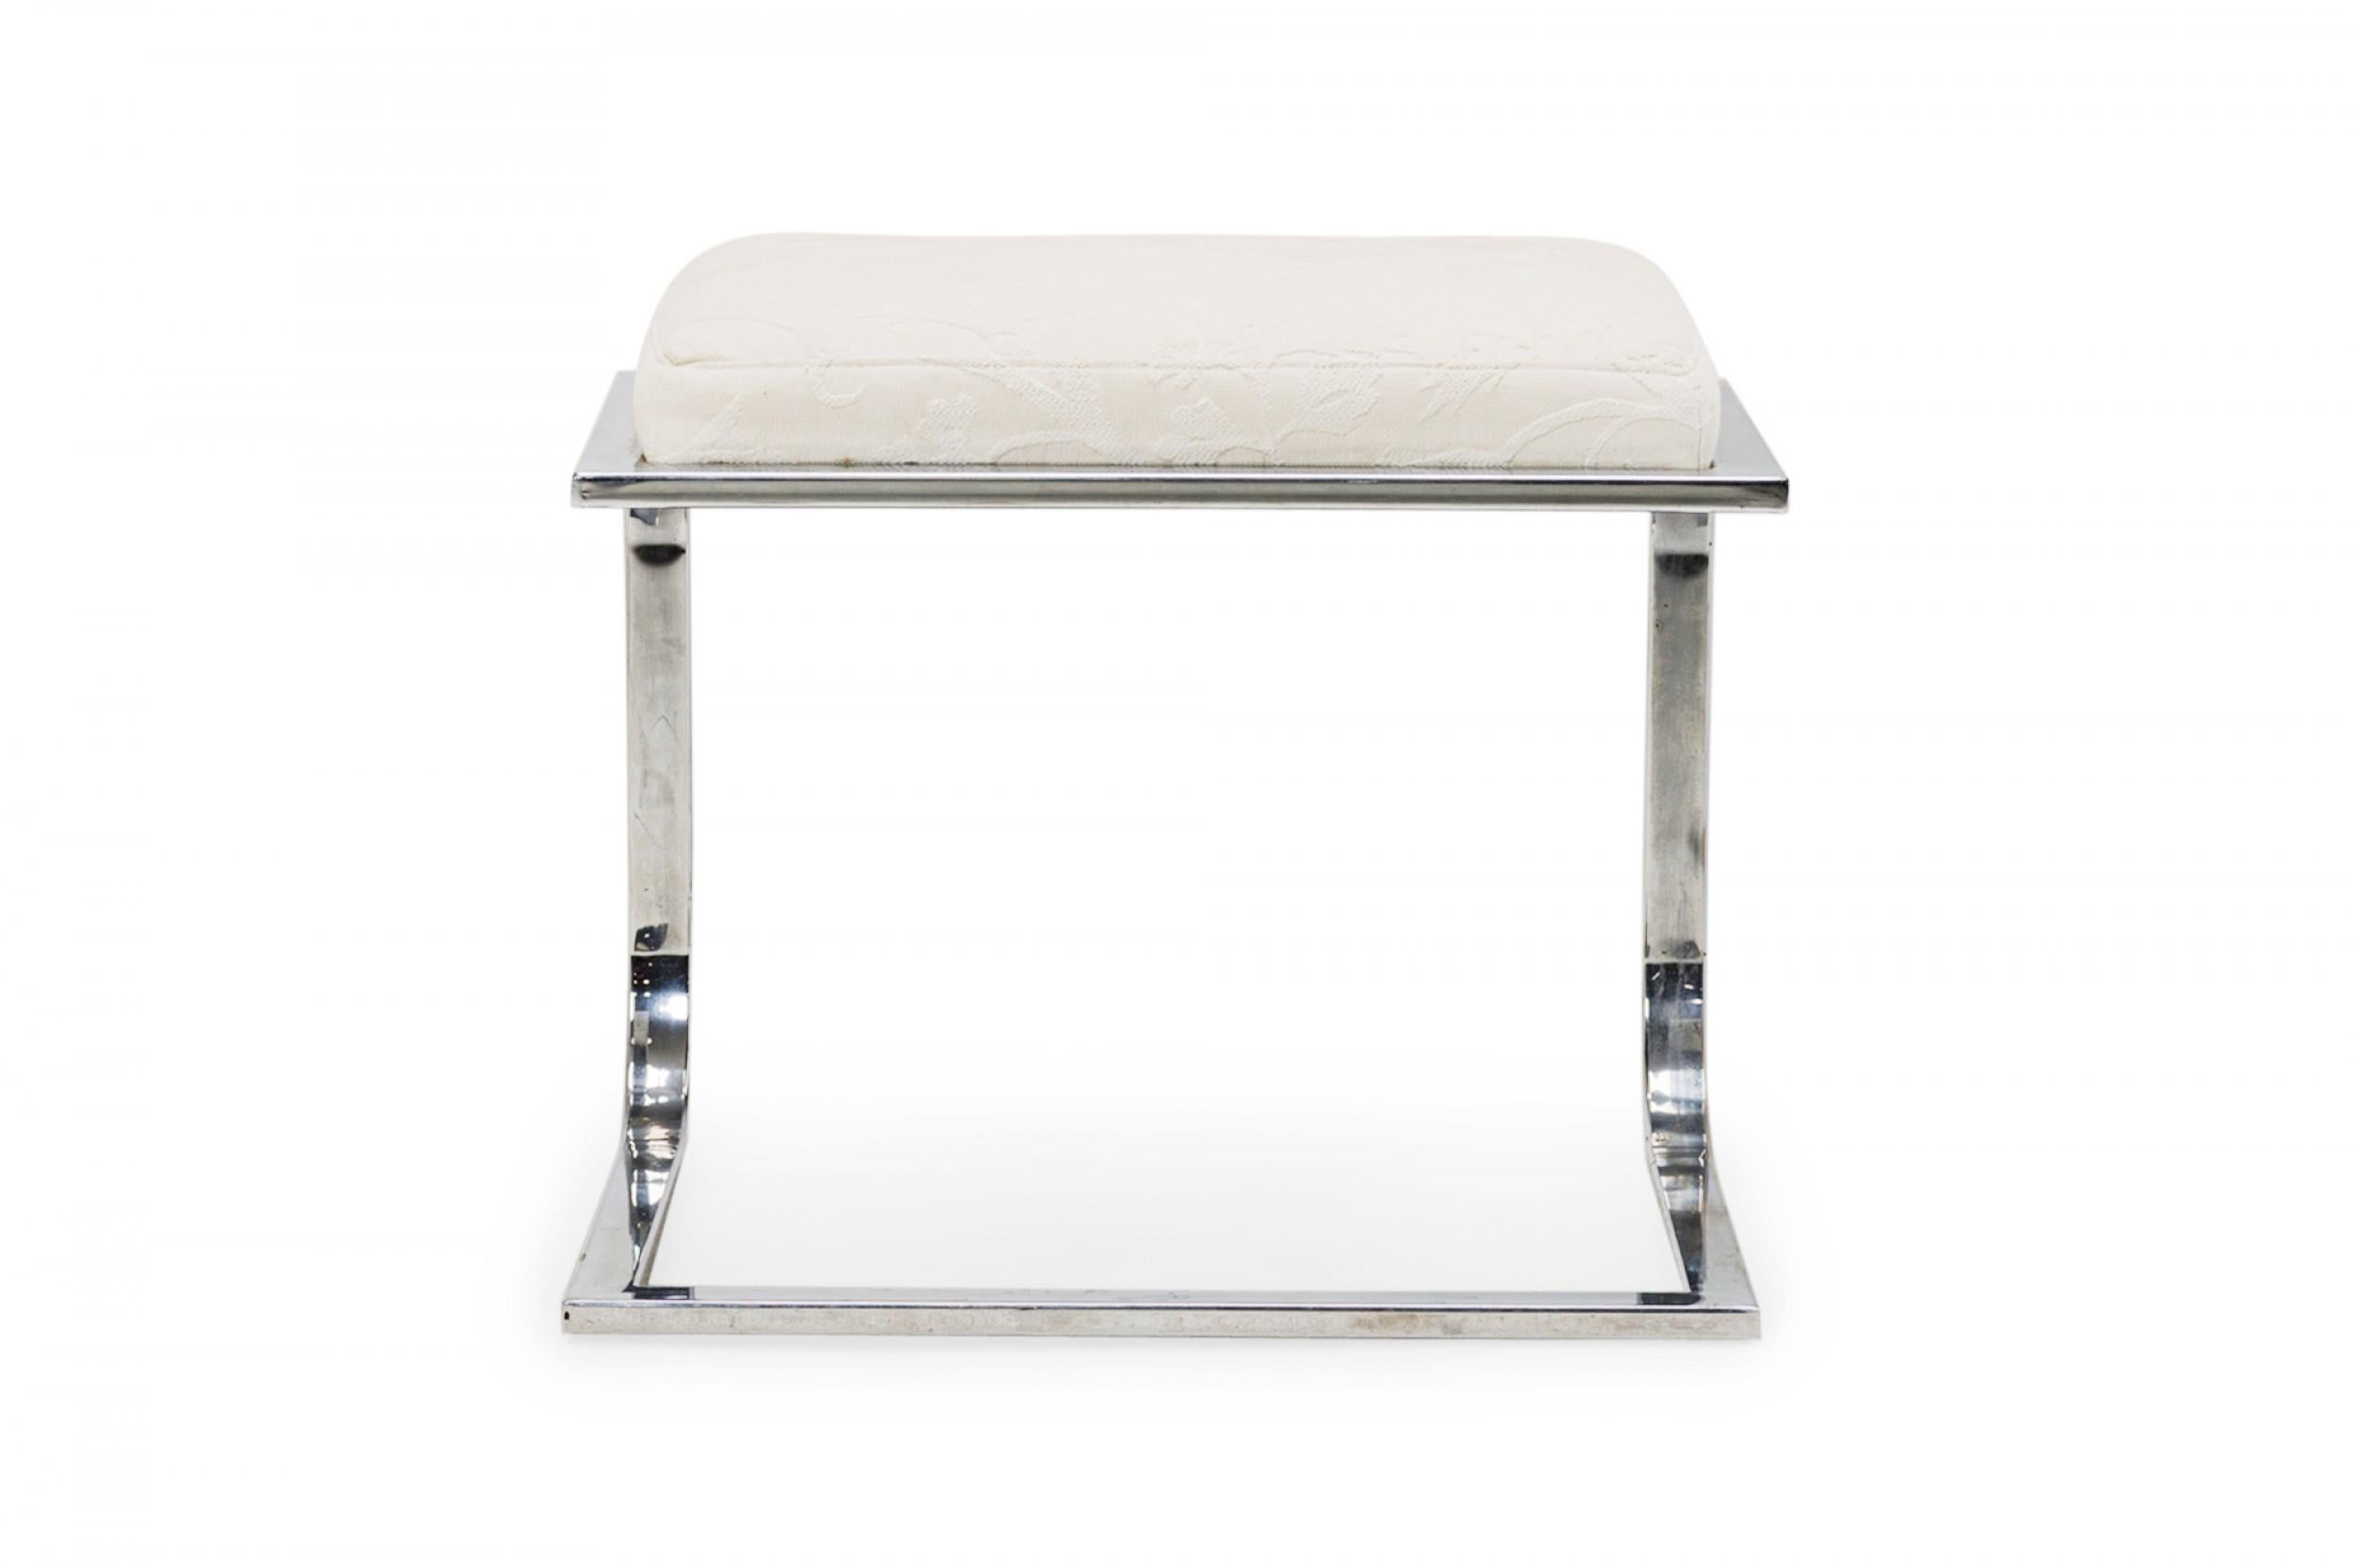 American Mid-Century cantilever design footstool with a curved square chrome tube base supporting a rectangular beige upholstered top with a faint floral pattern. (DIA DESIGN INSTITUTE OF AMERICA)
